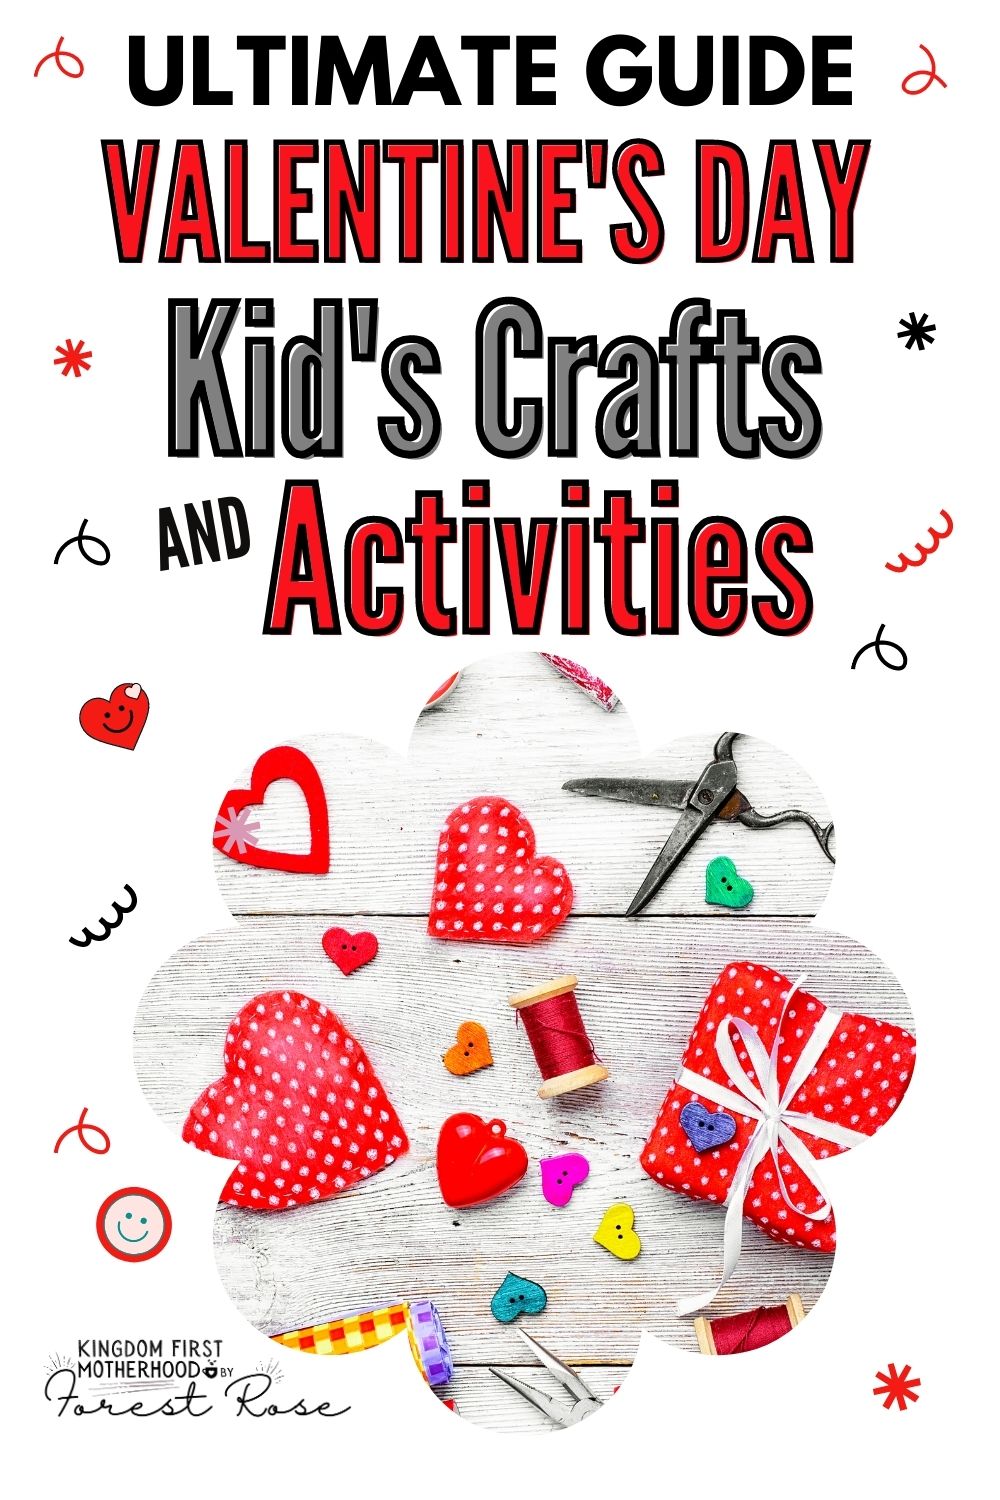 Ultimate Guide to Valentine's Day Kids Crafts and Activities 